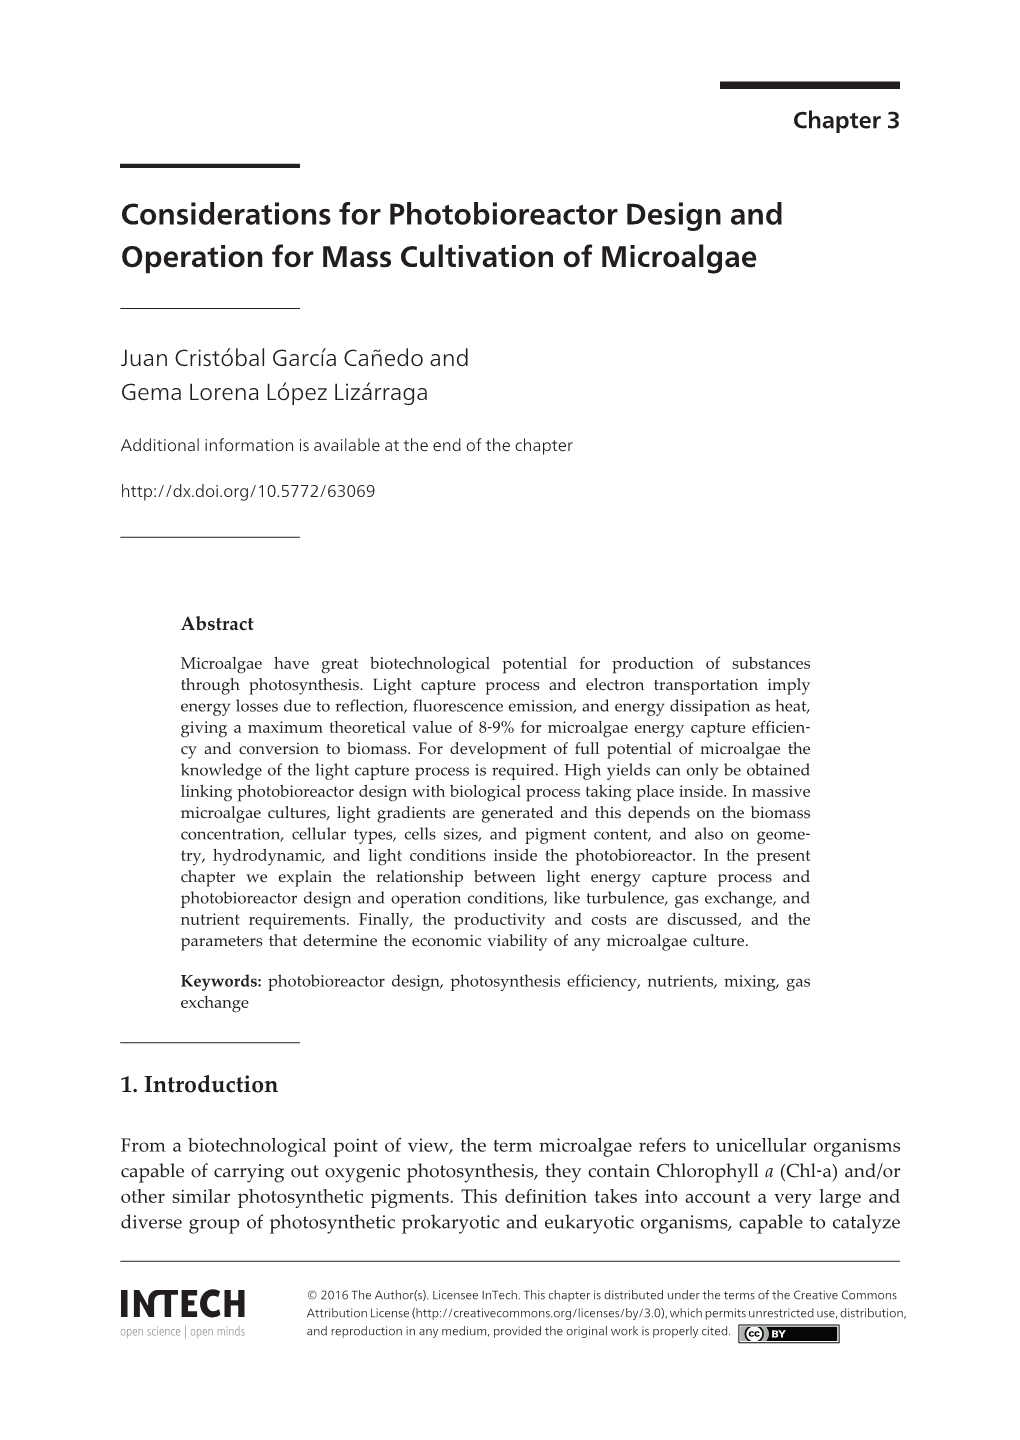 Considerations for Photobioreactor Design and Operation for Mass Cultivation of Microalgae